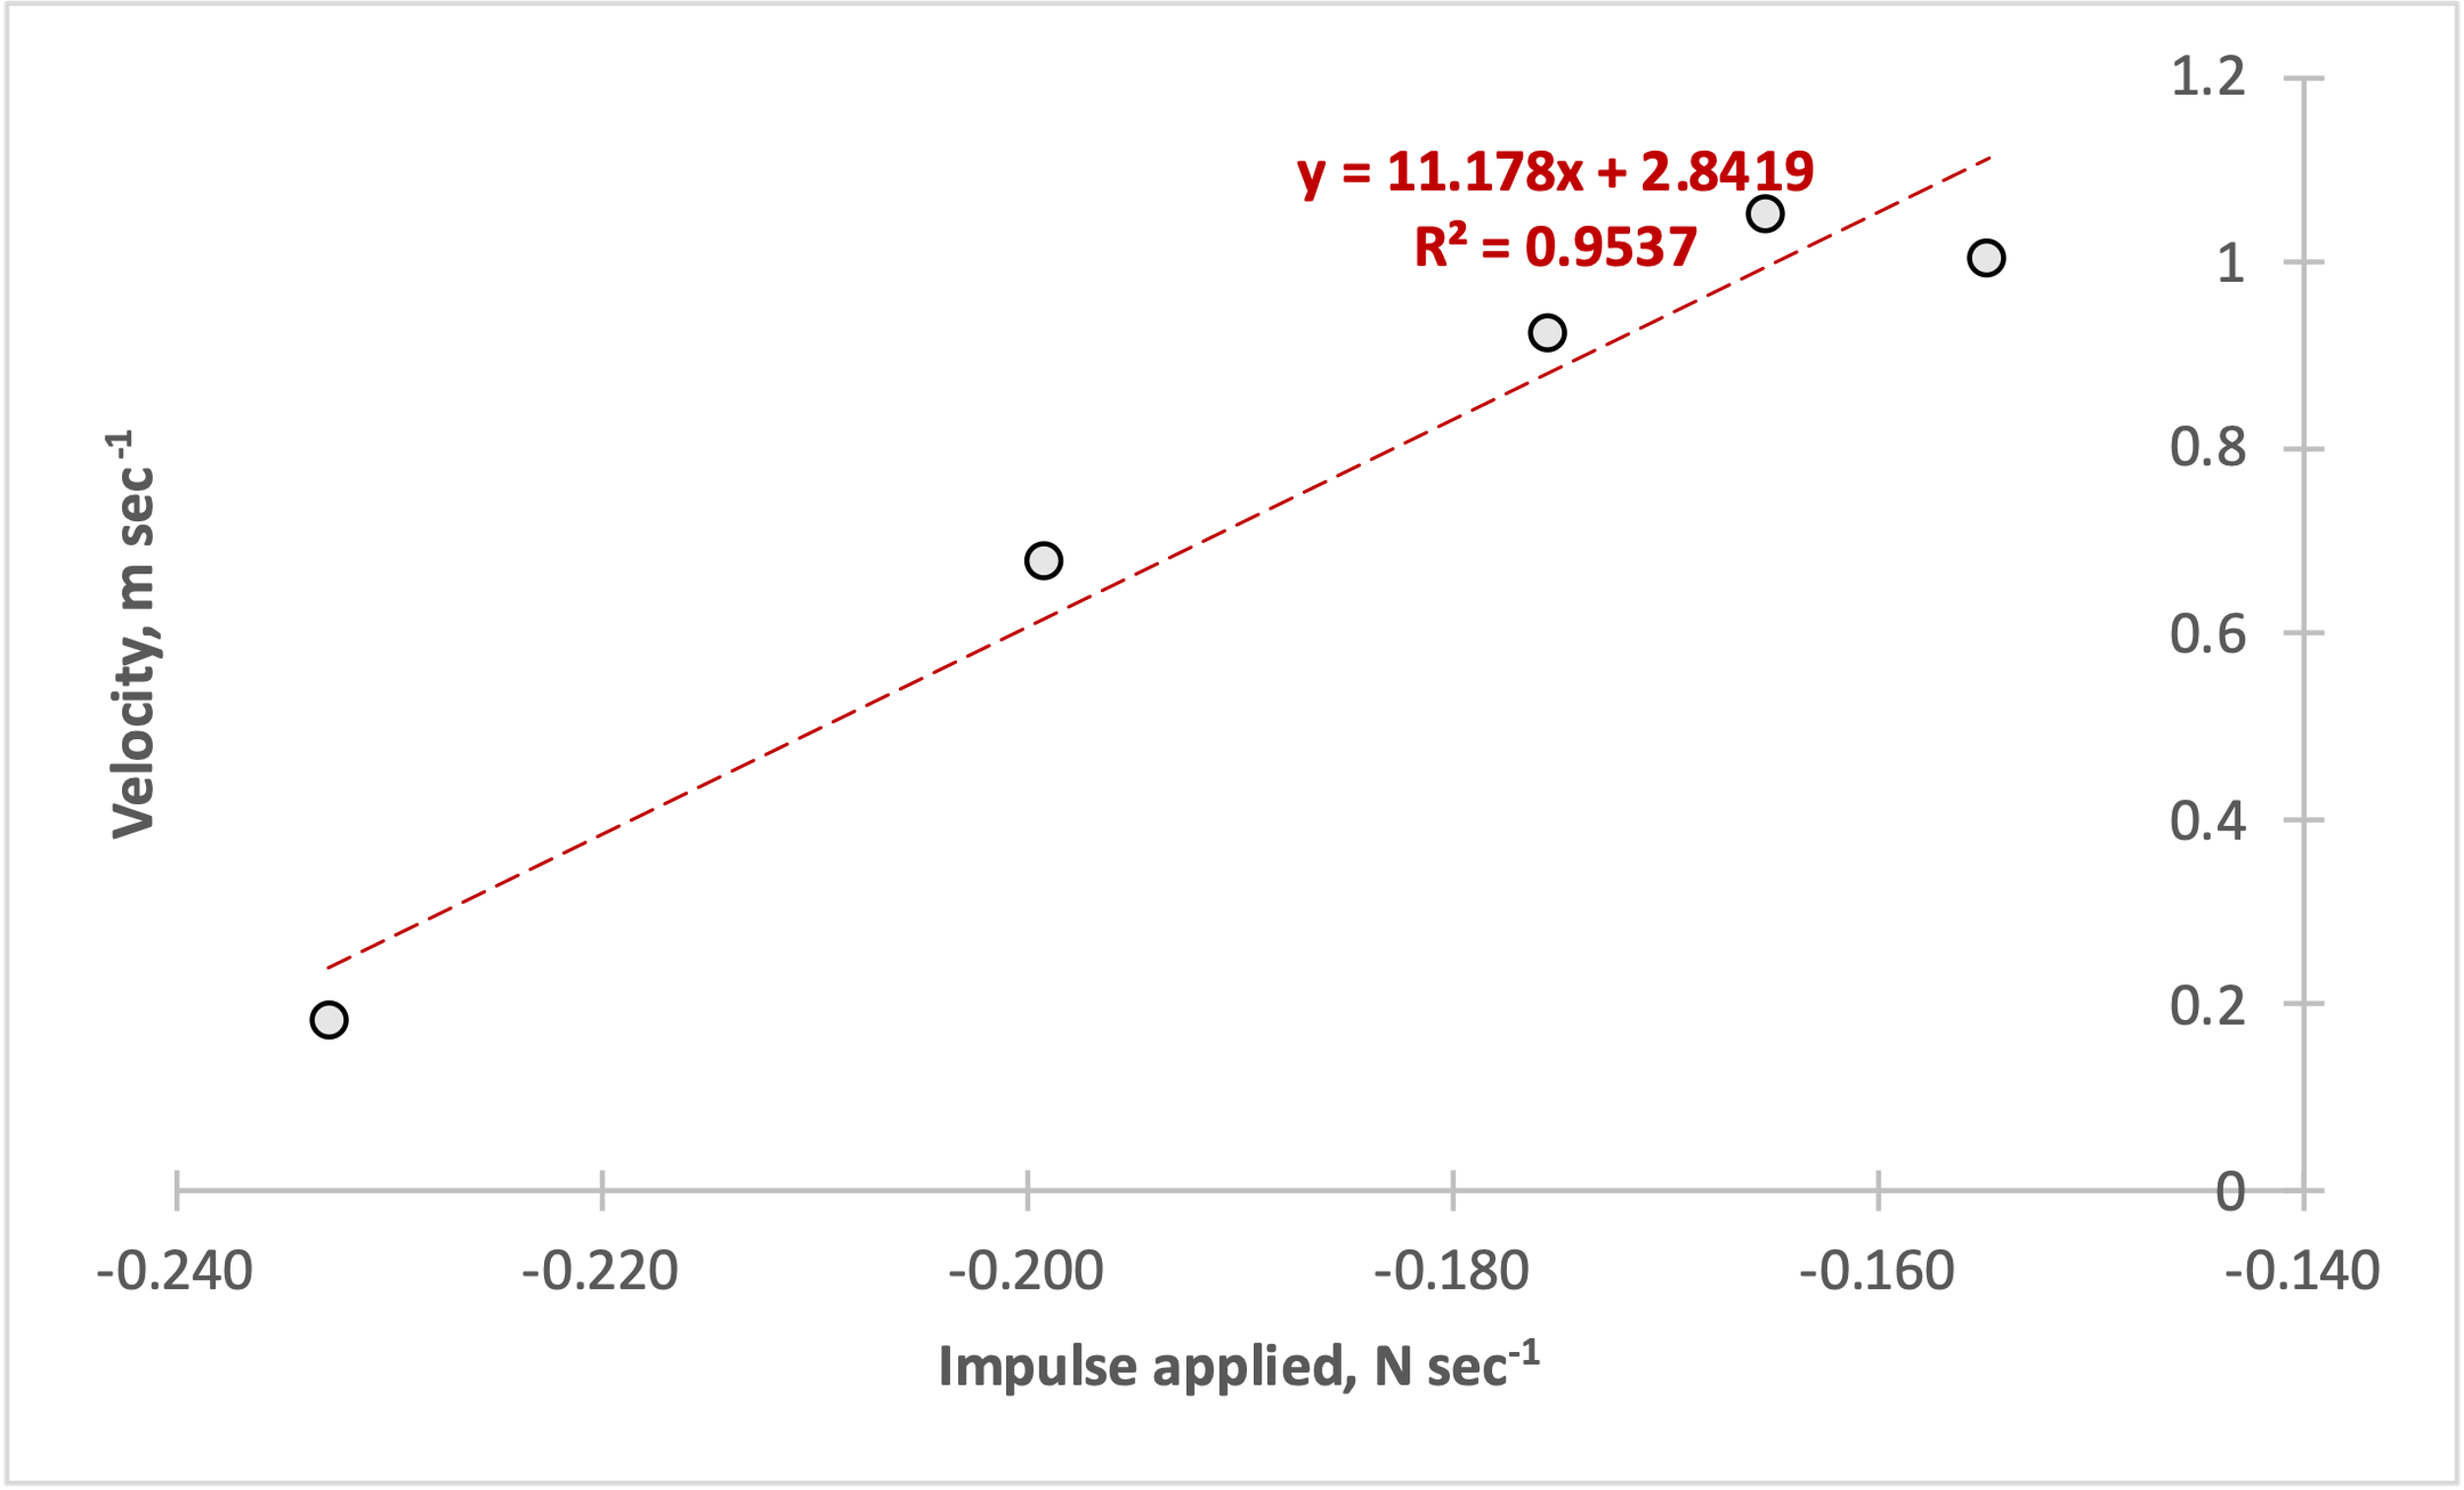 Dependence of the final velocity (m sec-1) on the applied pulse (N sec-1)